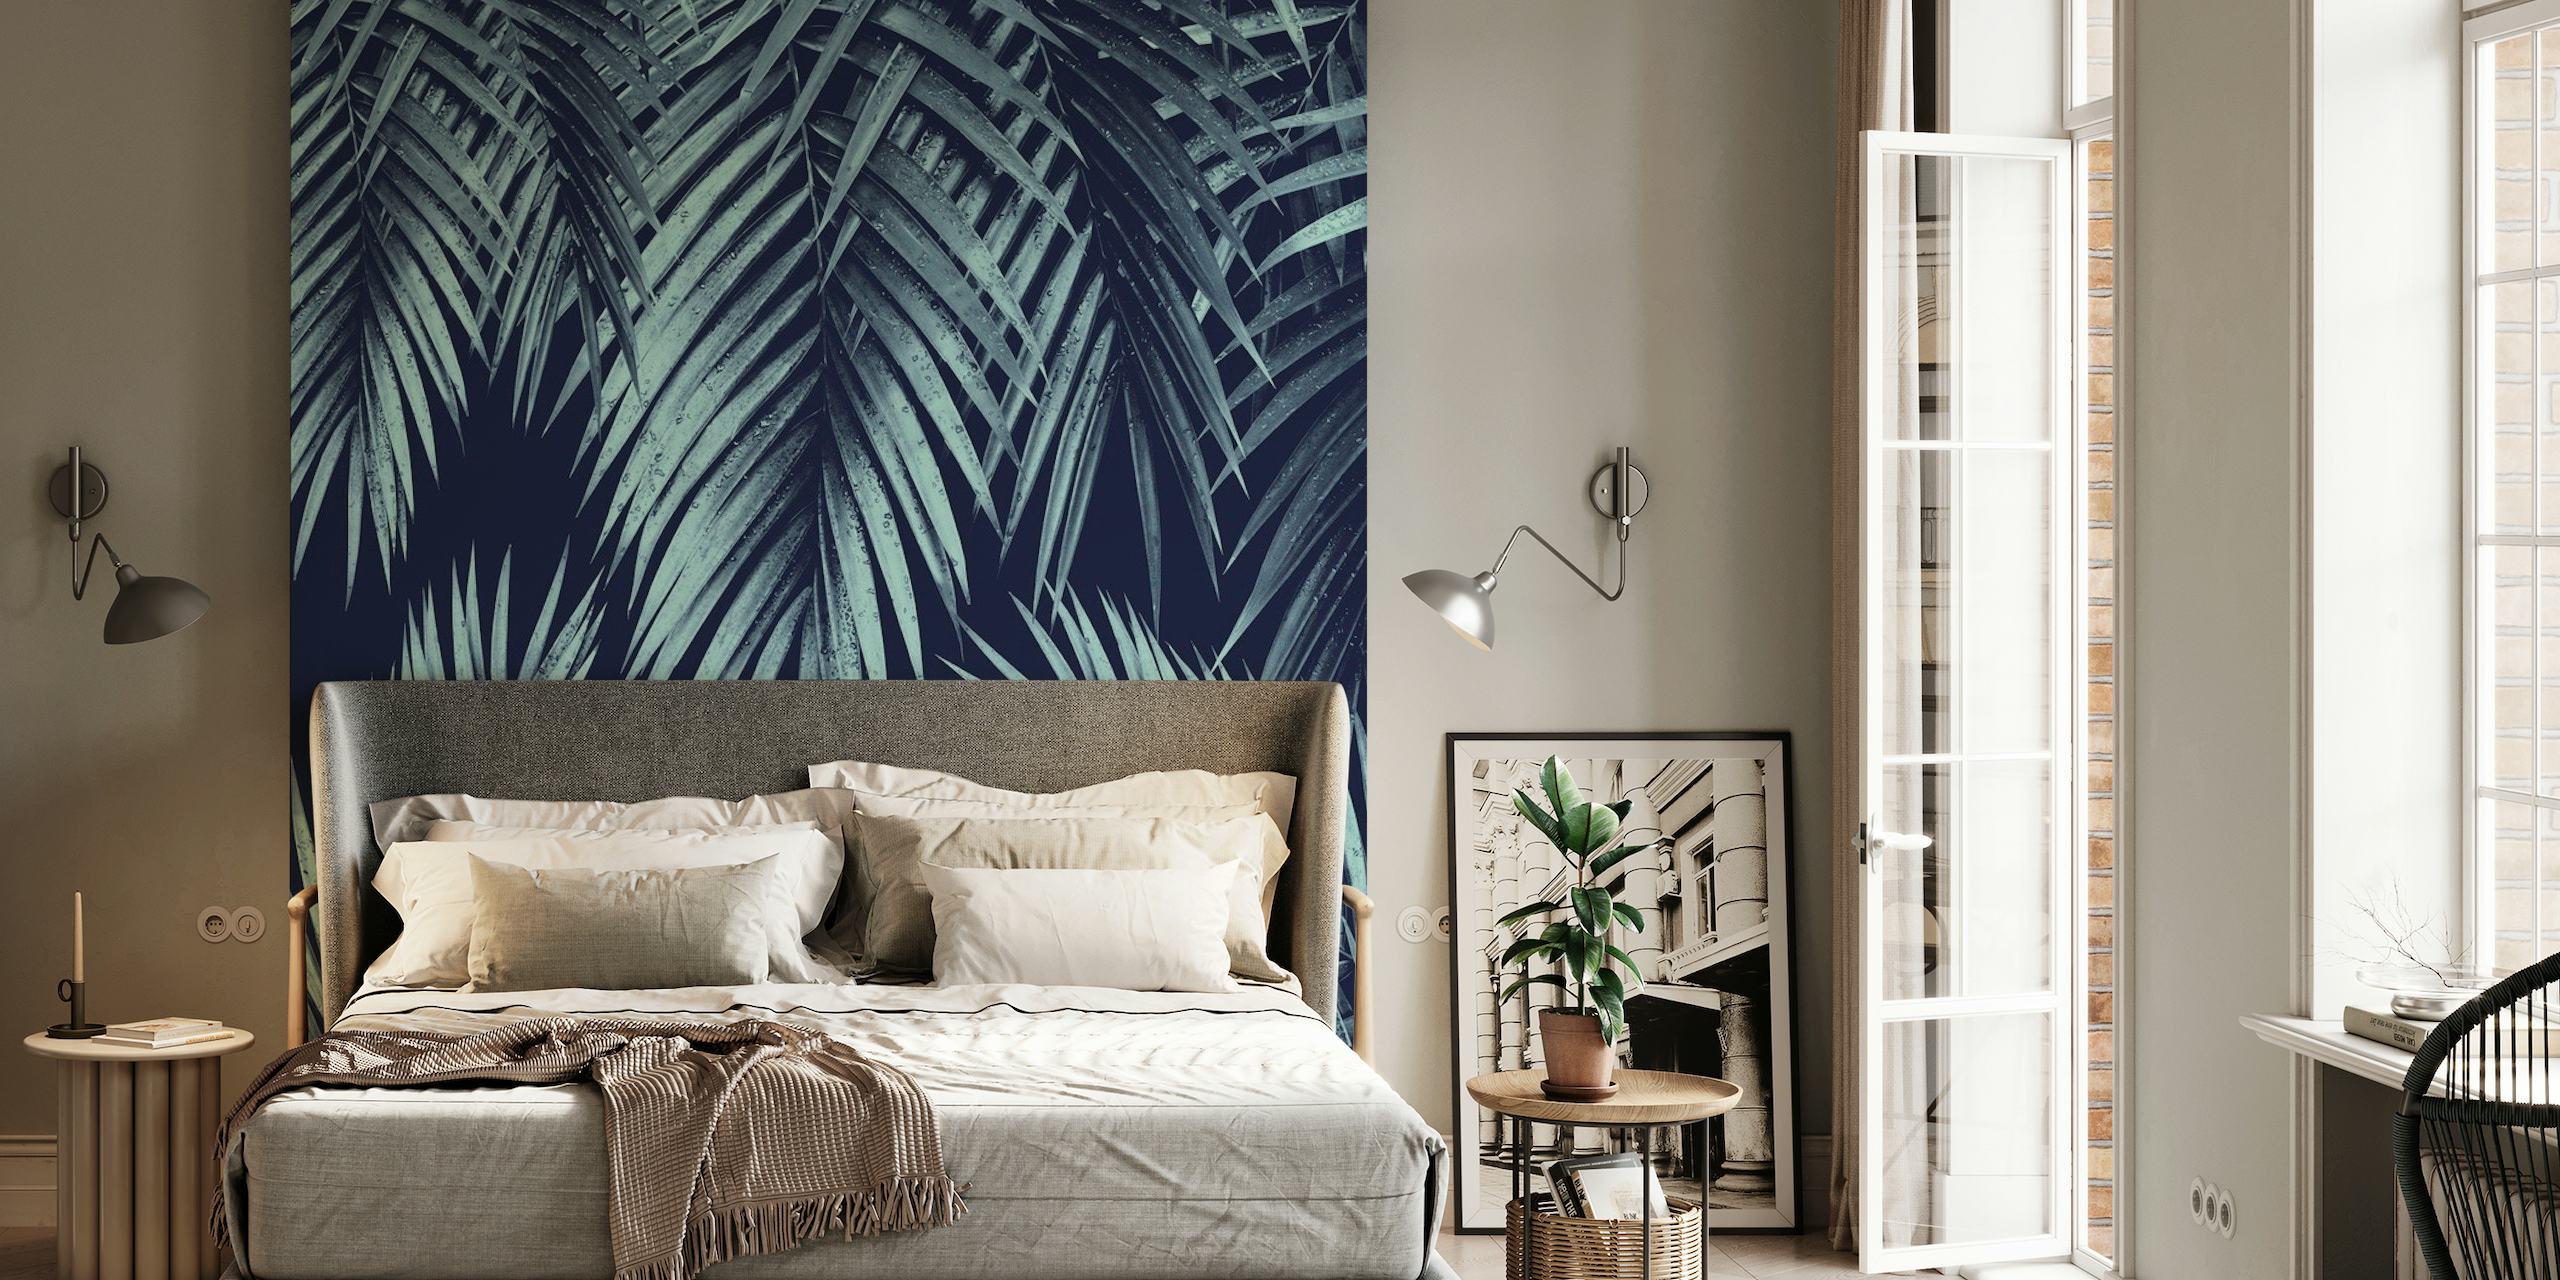 Palm Leaf Jungle Night Vibes wall mural with dark background